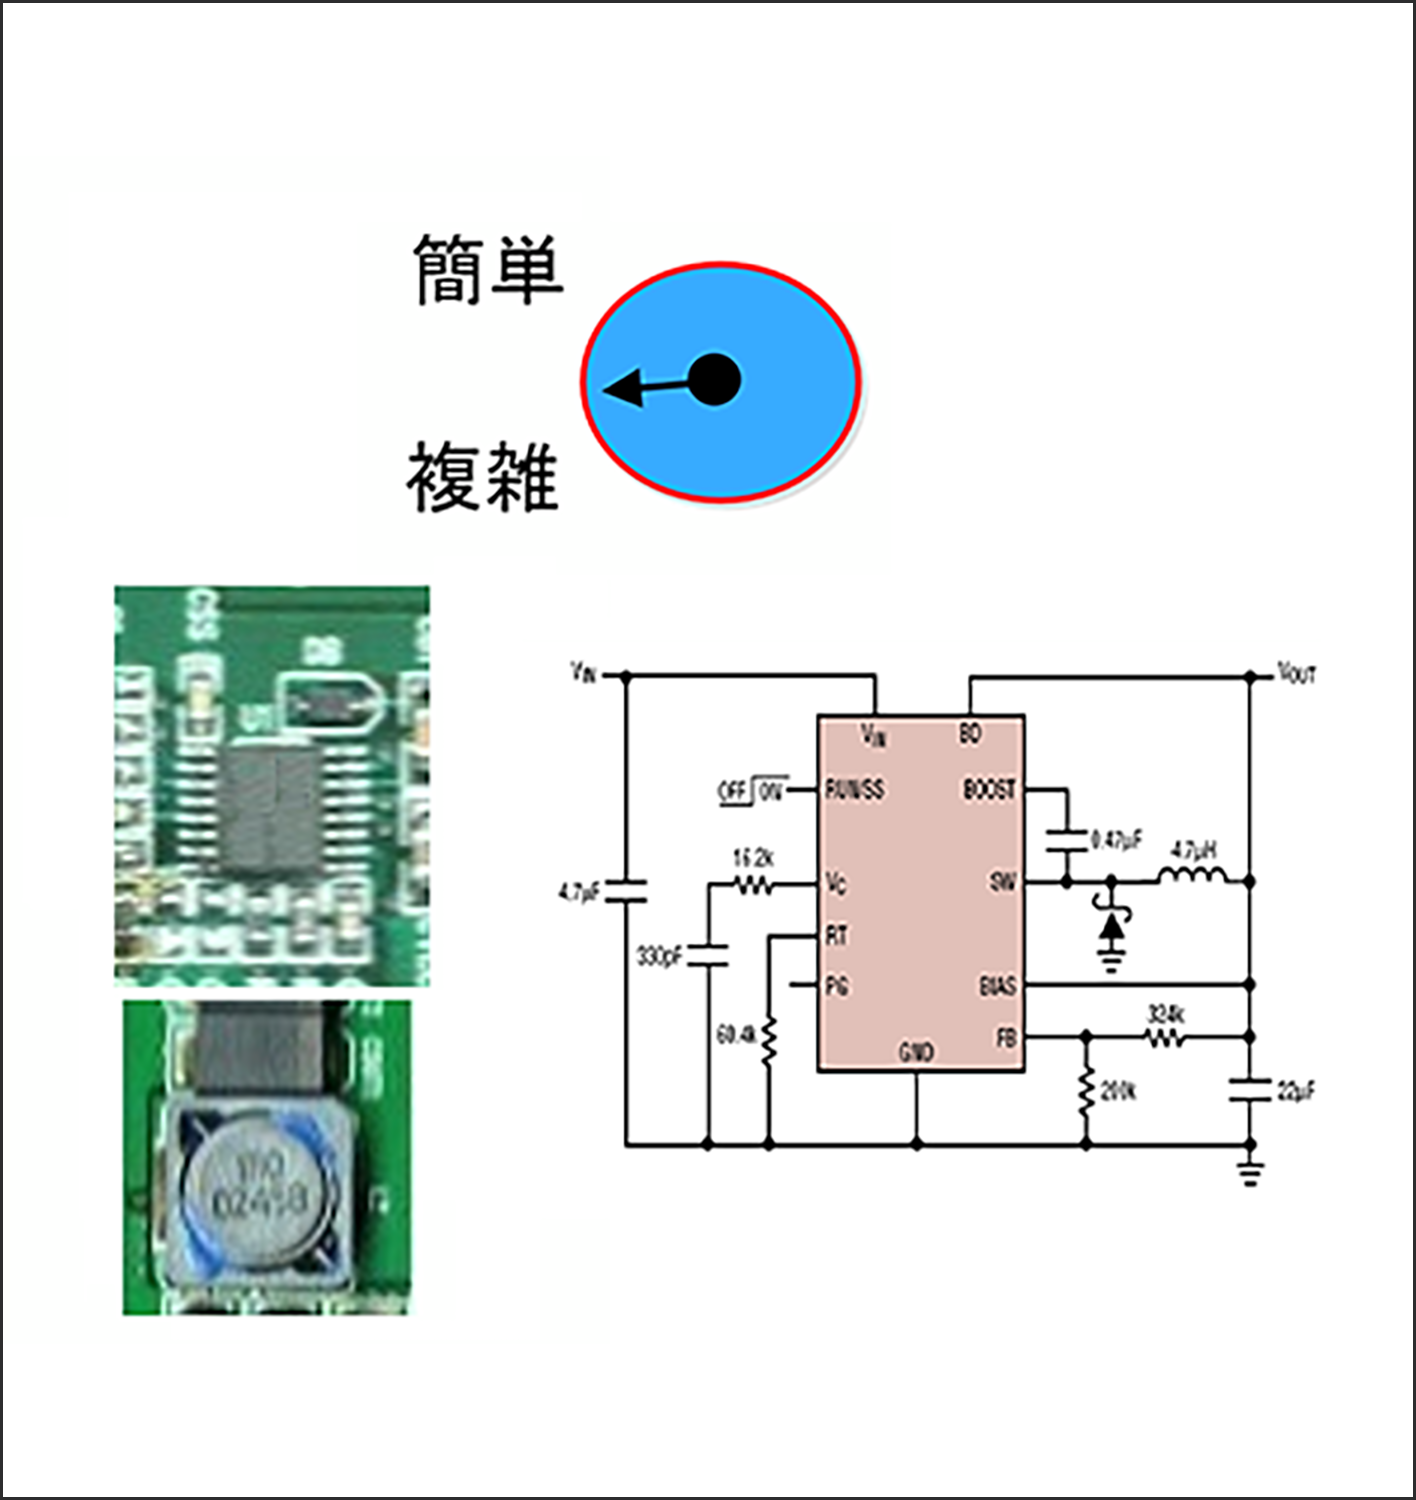 Figure 2: DC/DC converter with built-in power element